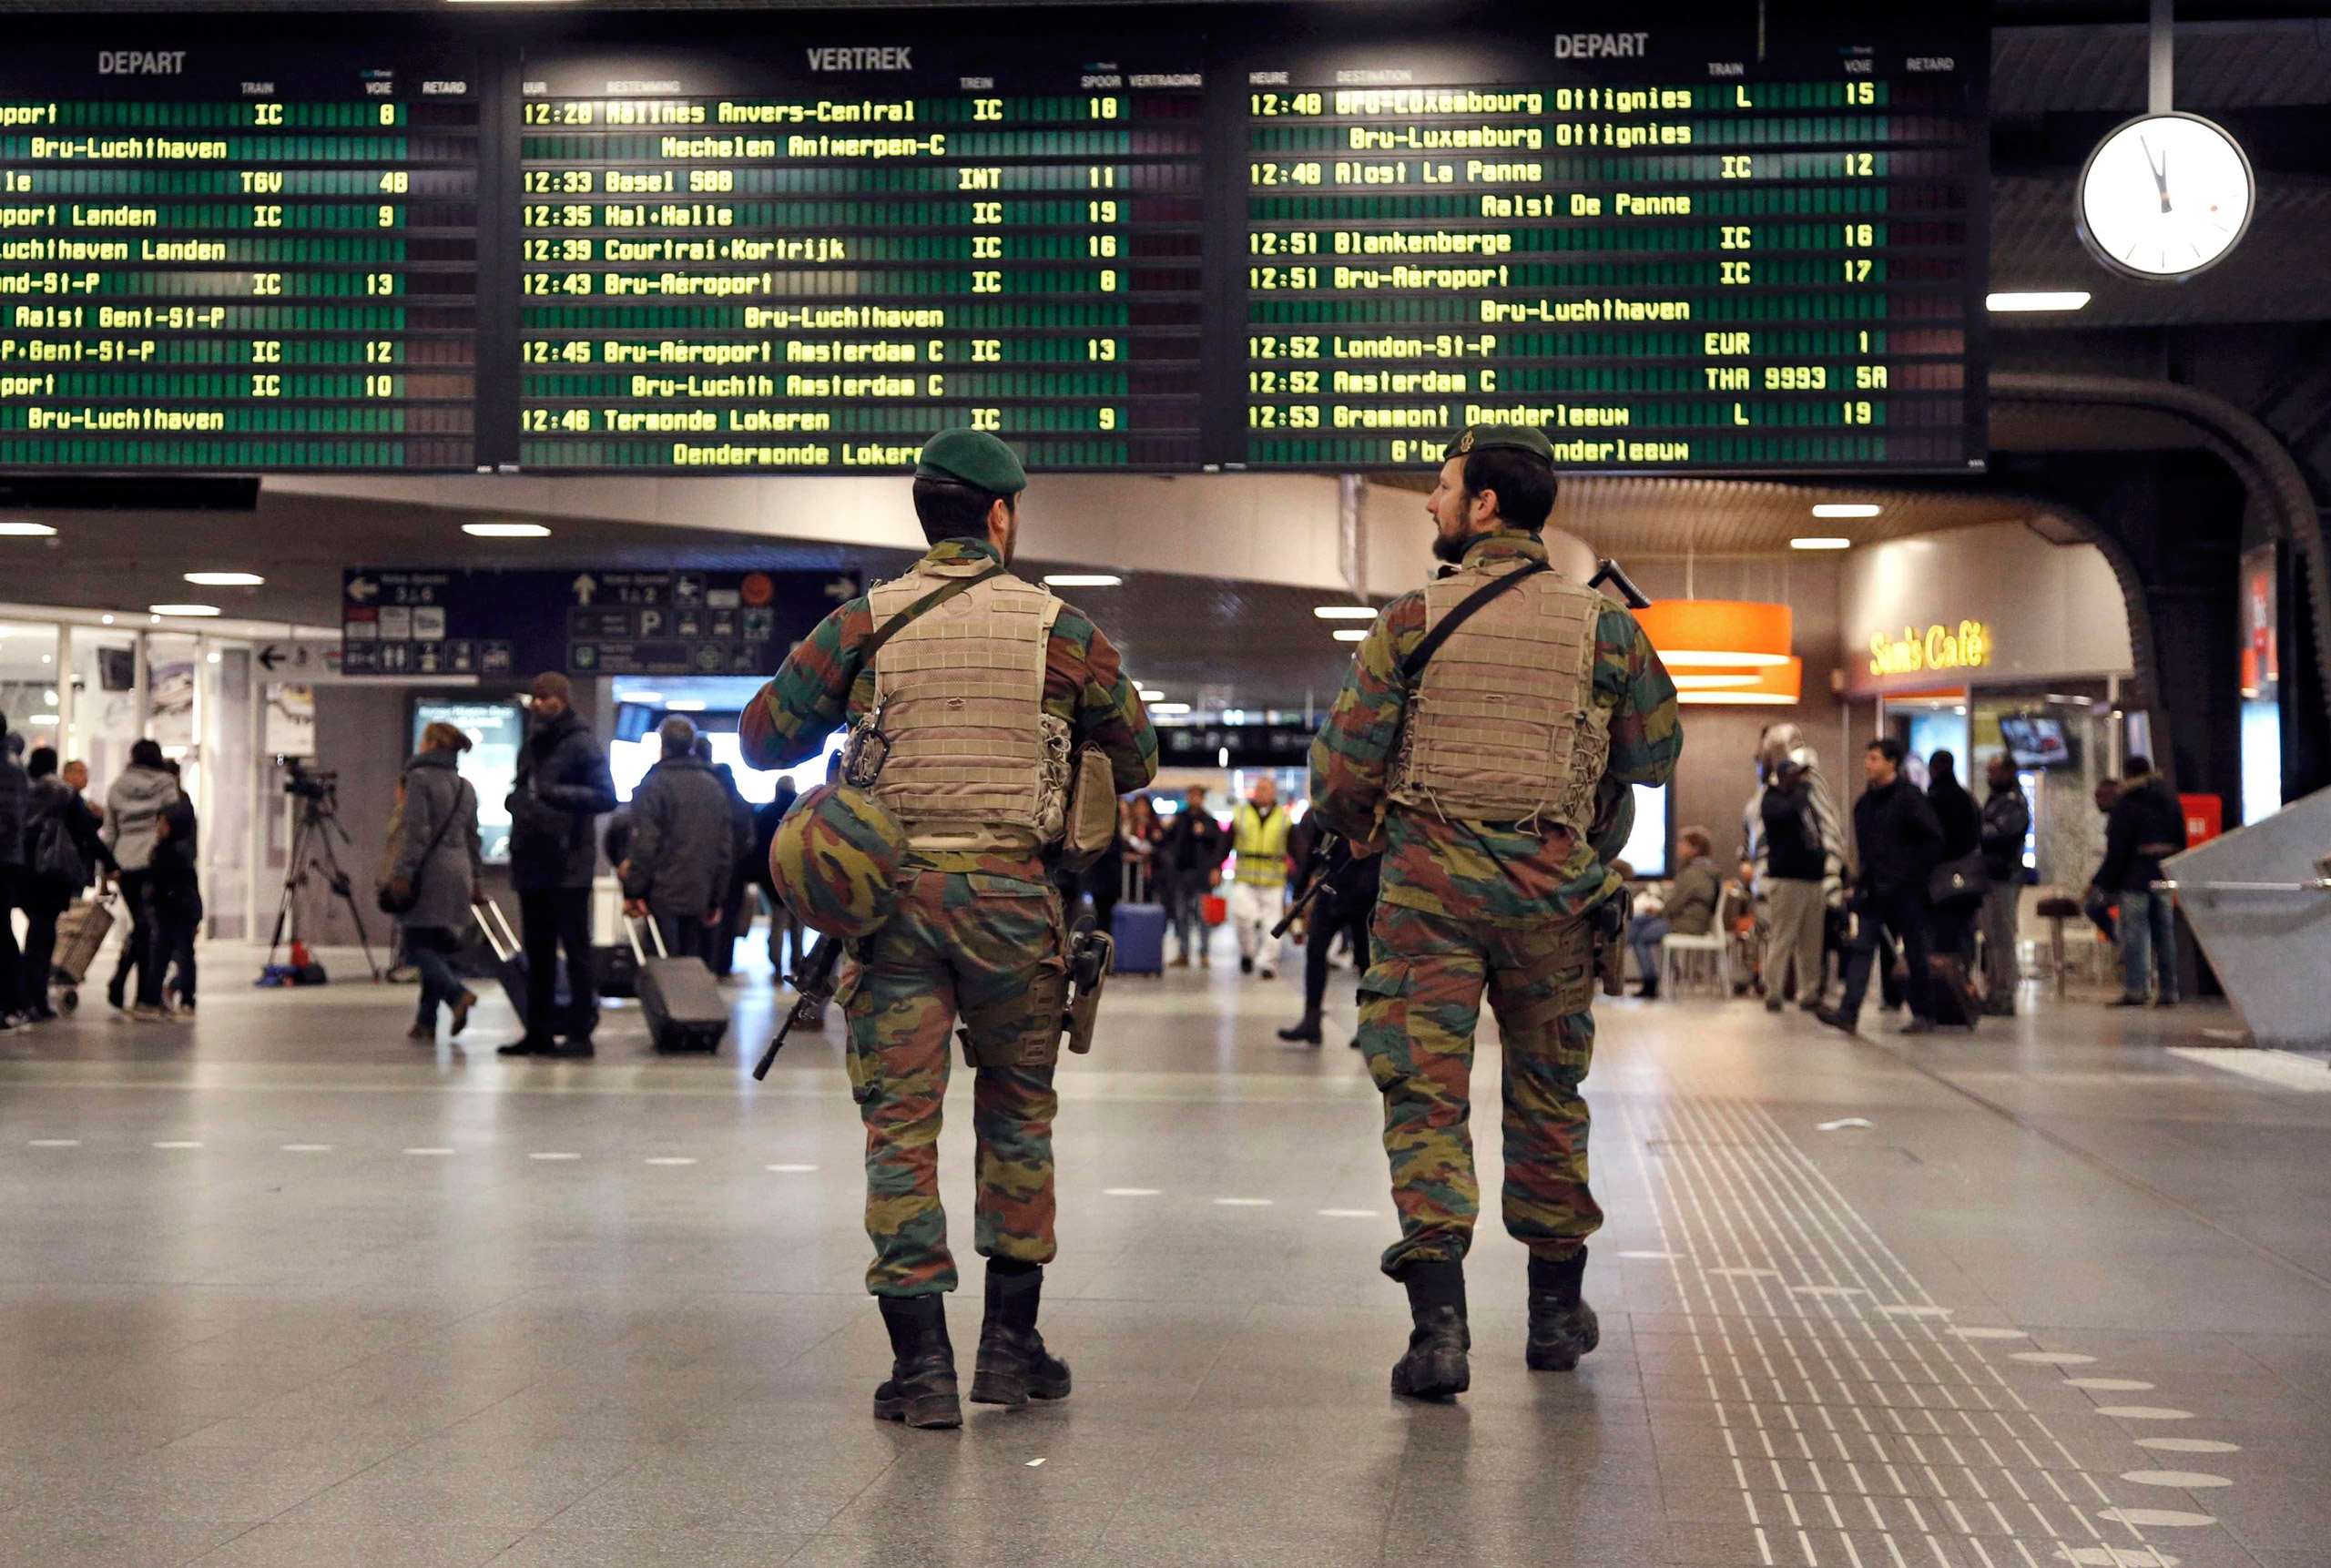 Belgian soldiers patrol in the arrival hall at Midi railway station, after security was tightened following the fatal attacks in Paris, in Brussels, on Nov. 21, 2015, (Francois Lenoir—Reuters)